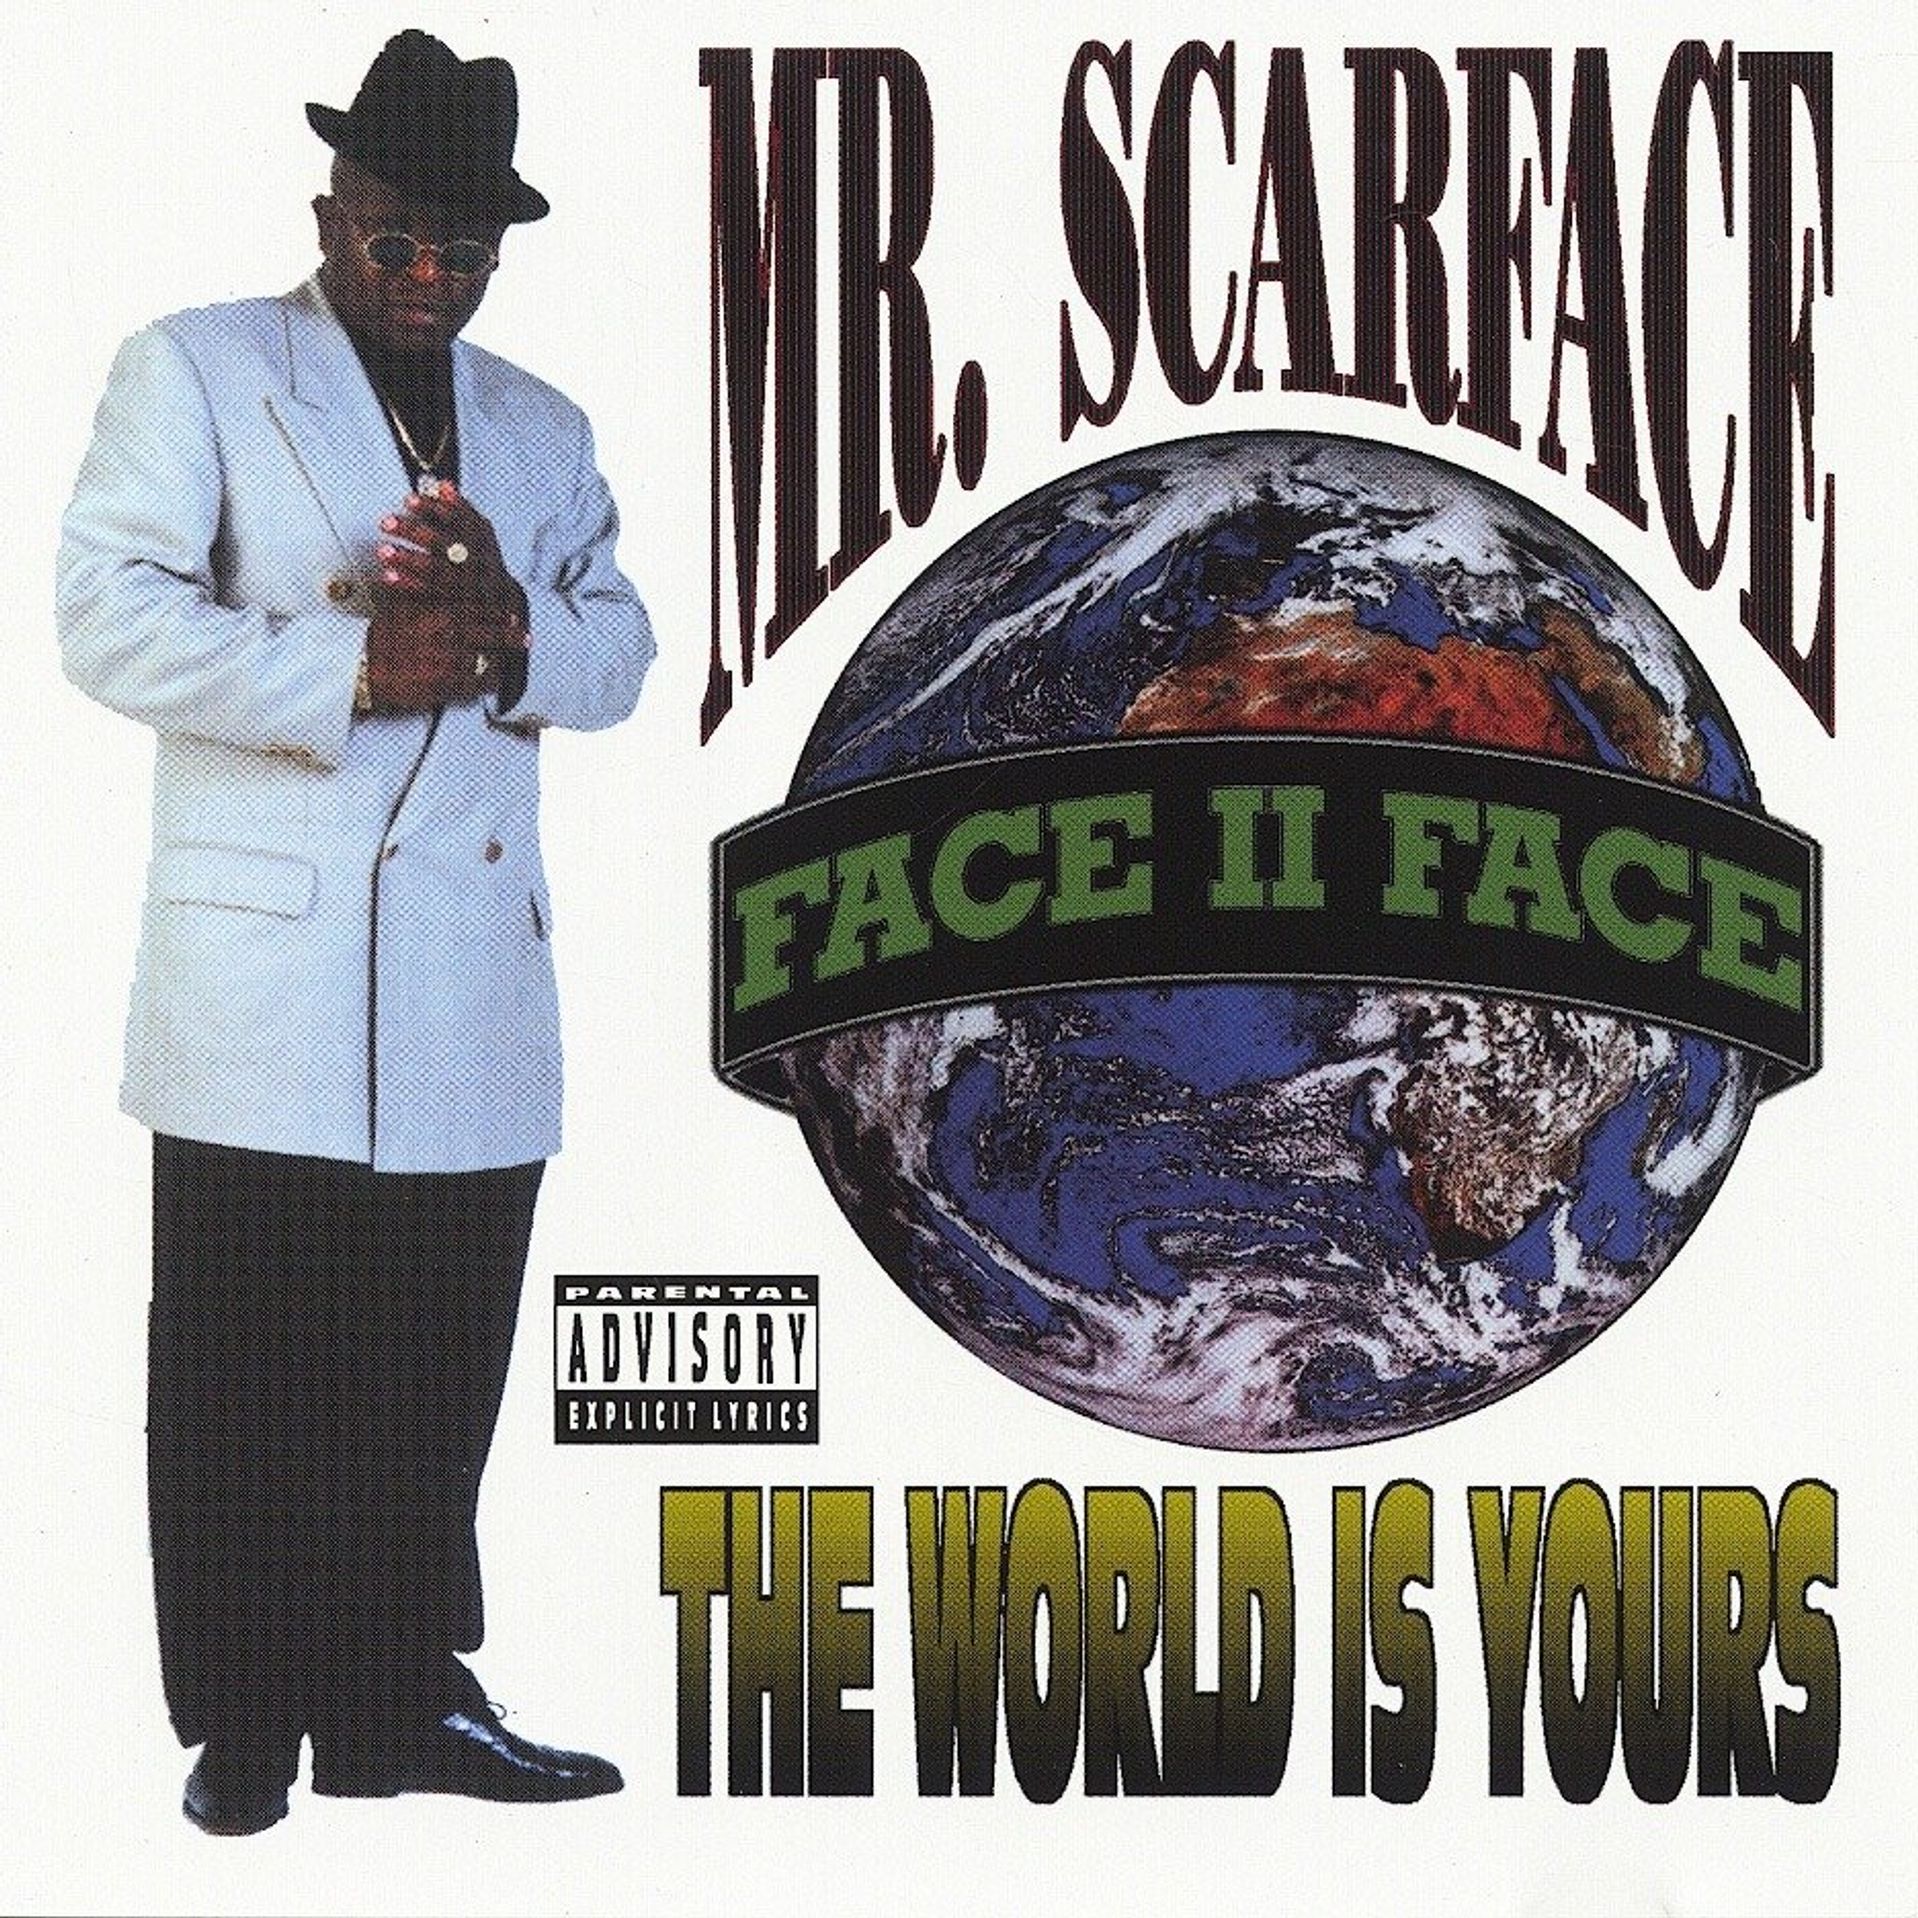 Album Title: The World is Yours by: Scarface